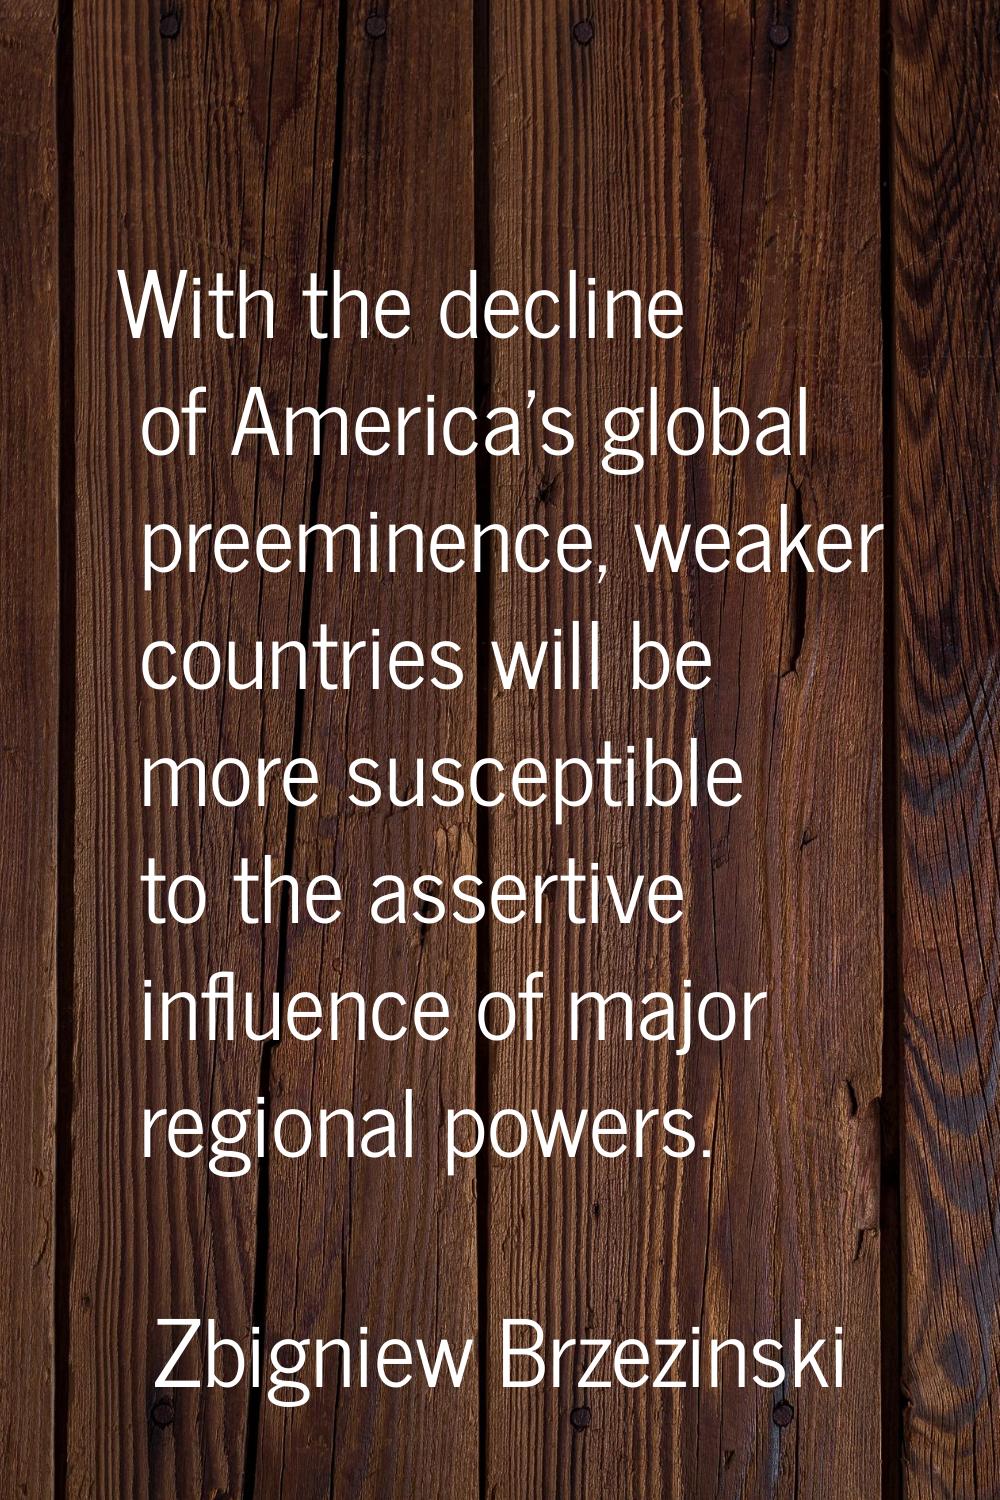 With the decline of America's global preeminence, weaker countries will be more susceptible to the 